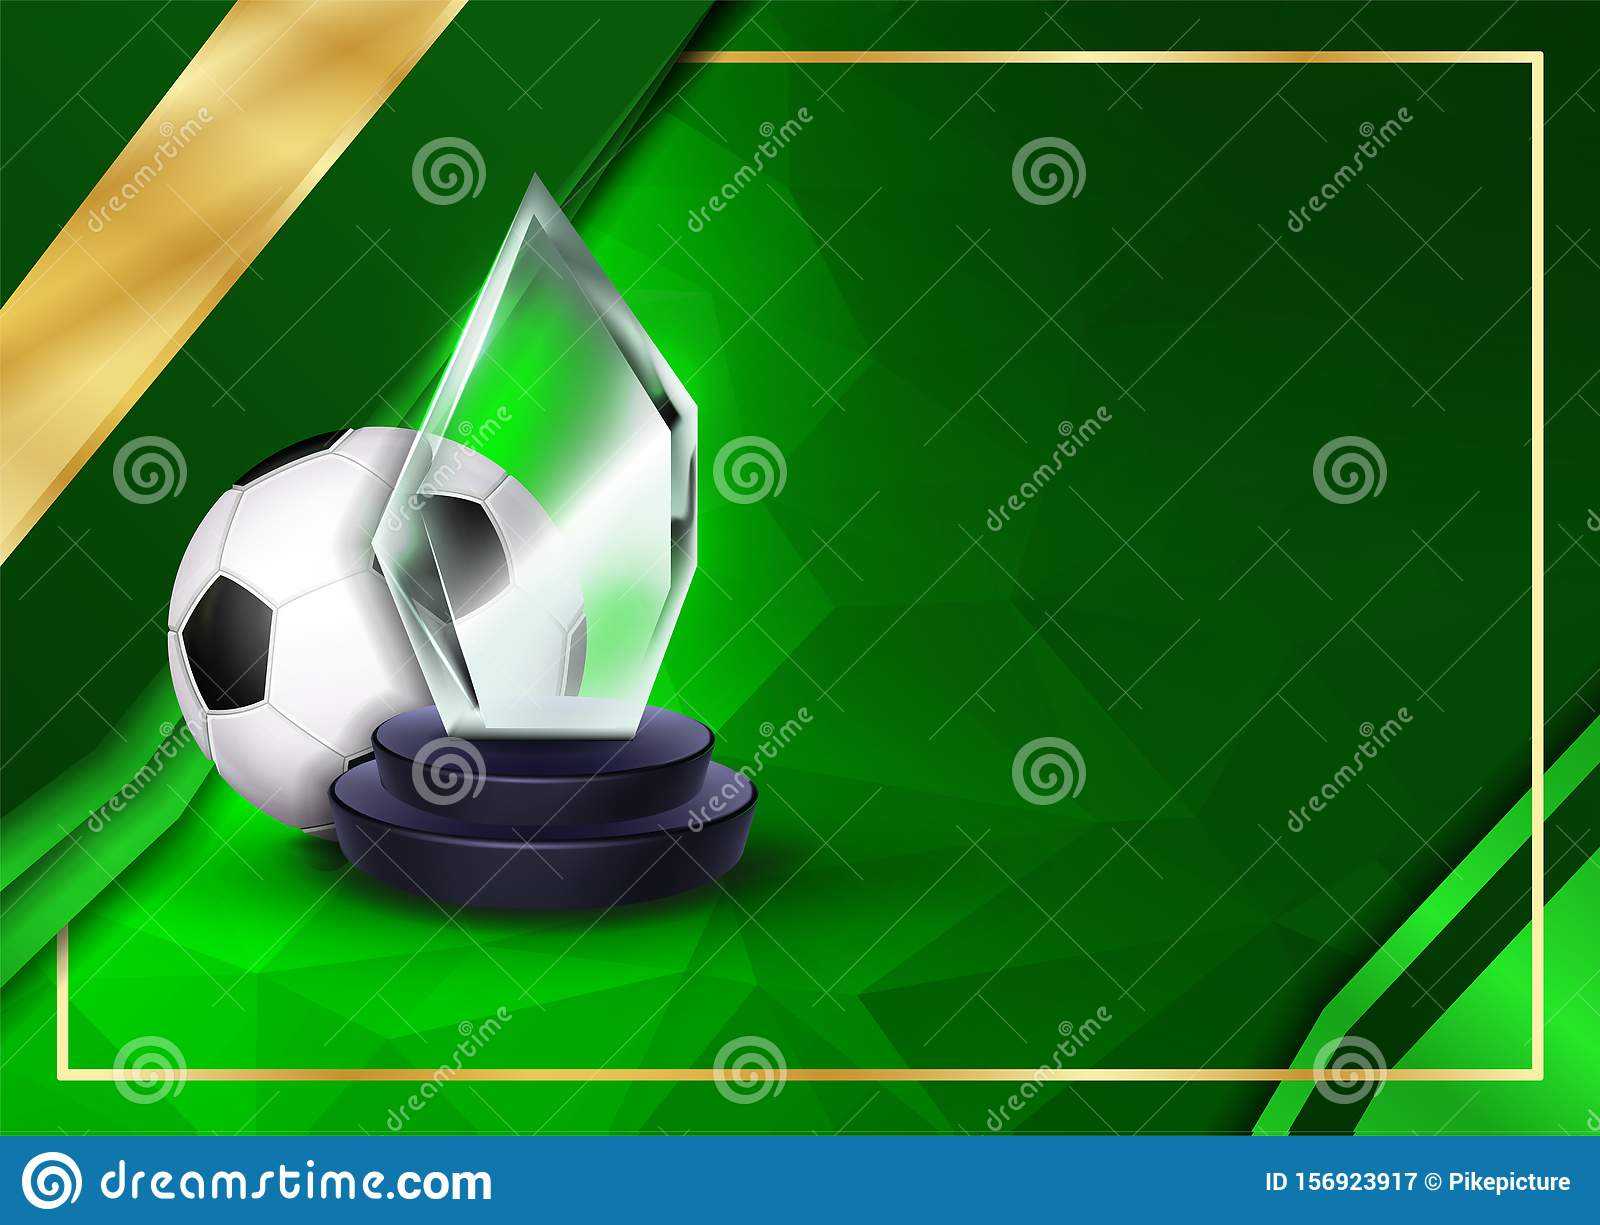 Soccer Certificate Diploma With Glass Trophy Vector. Sport In Soccer Award Certificate Templates Free